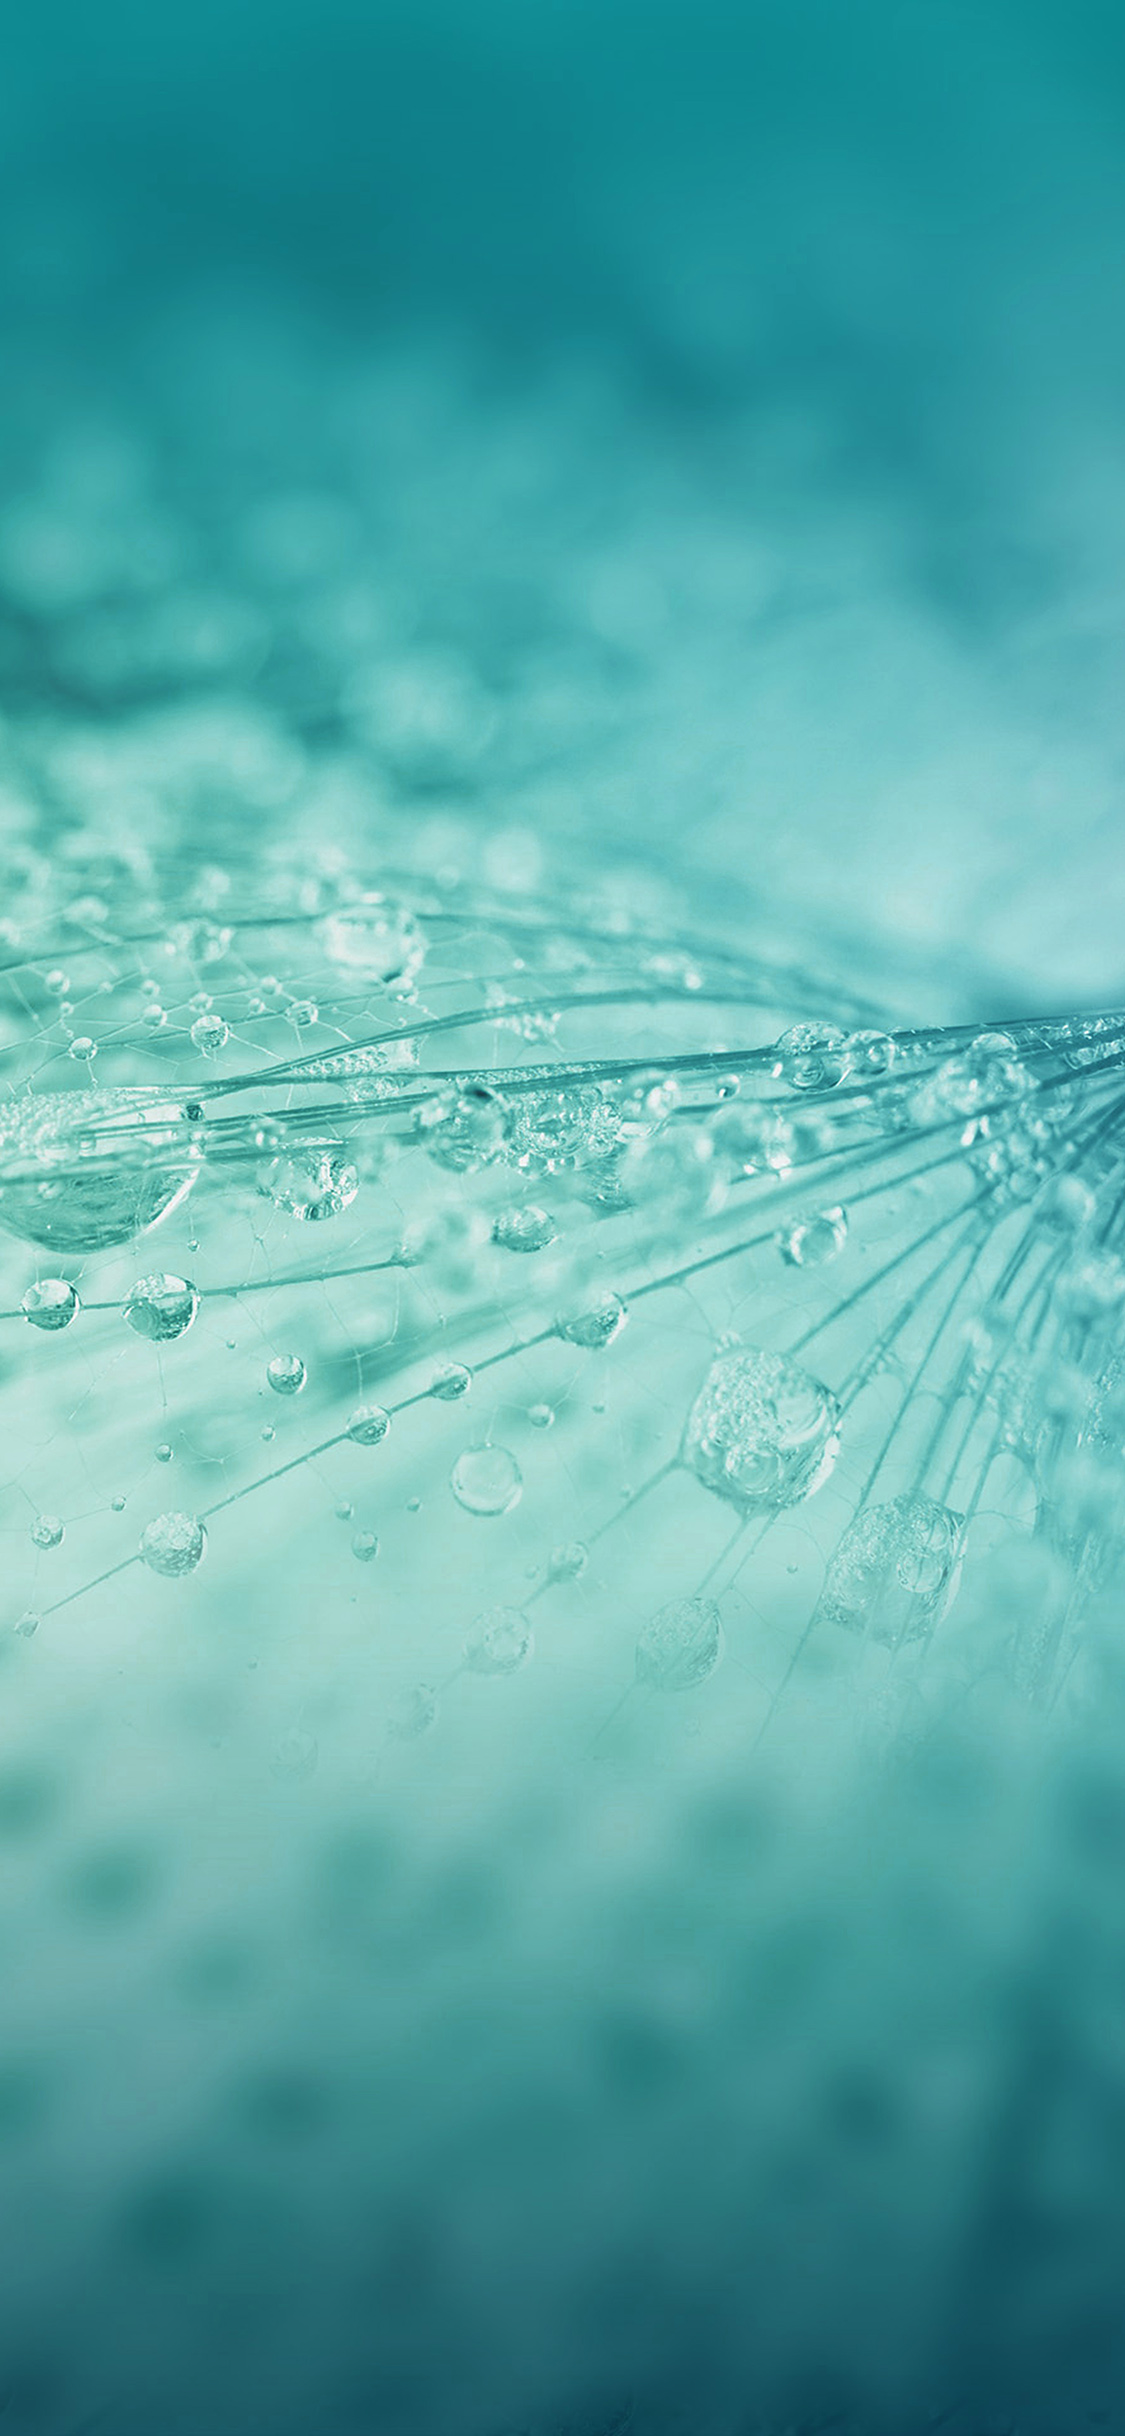 A close up of water droplets on a surface. - Aqua